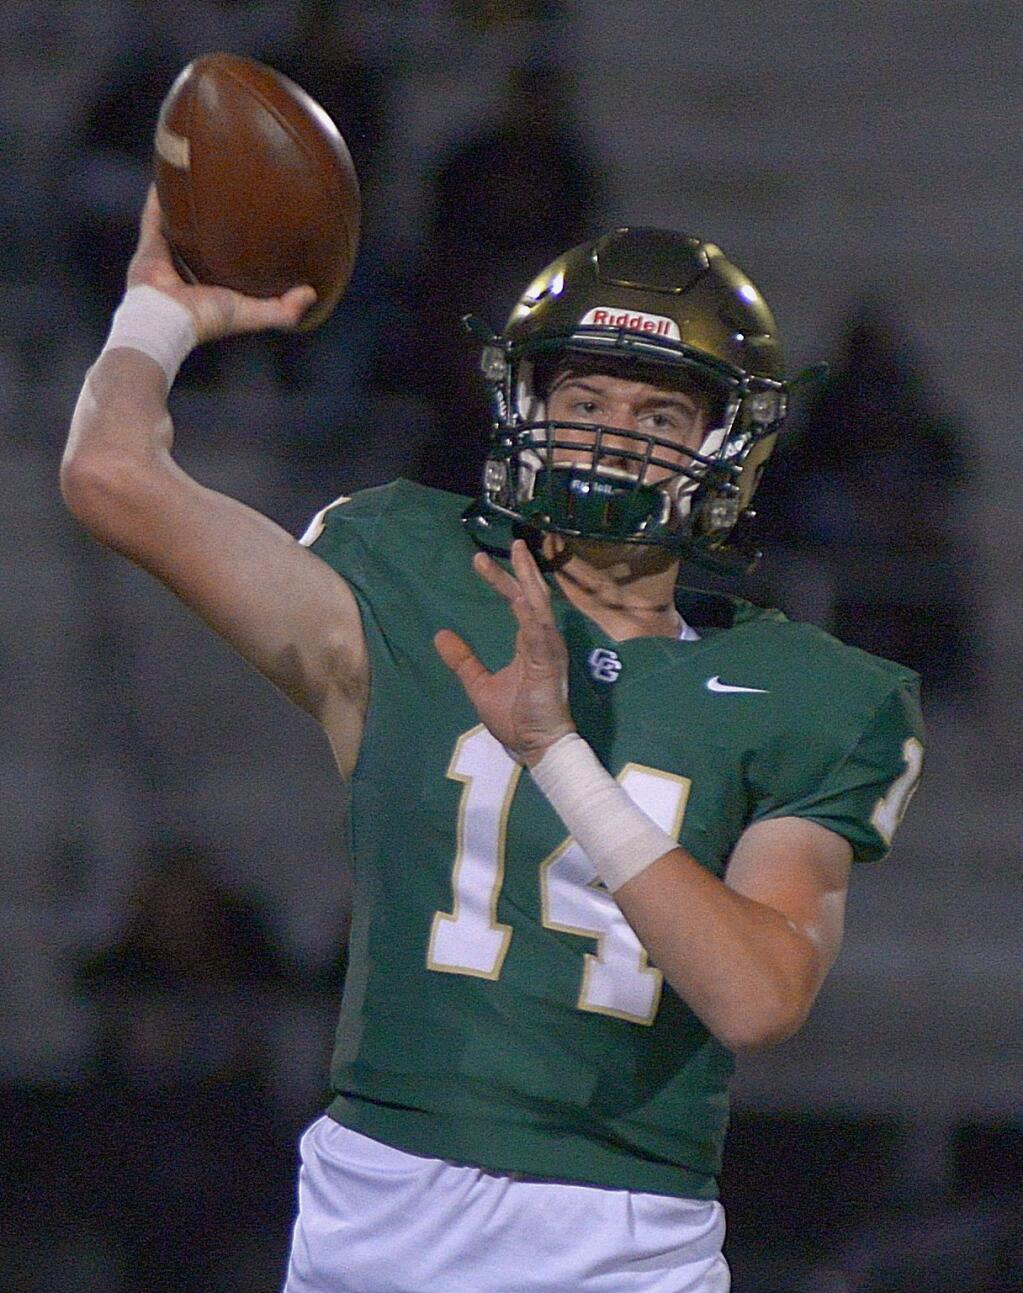 Casa Grande quarterback Jacob Porteous is one of the most prolific passers ever in the North Coast Section. (SUMNER FOWLER / FOR THE ARGUS-COURIER)